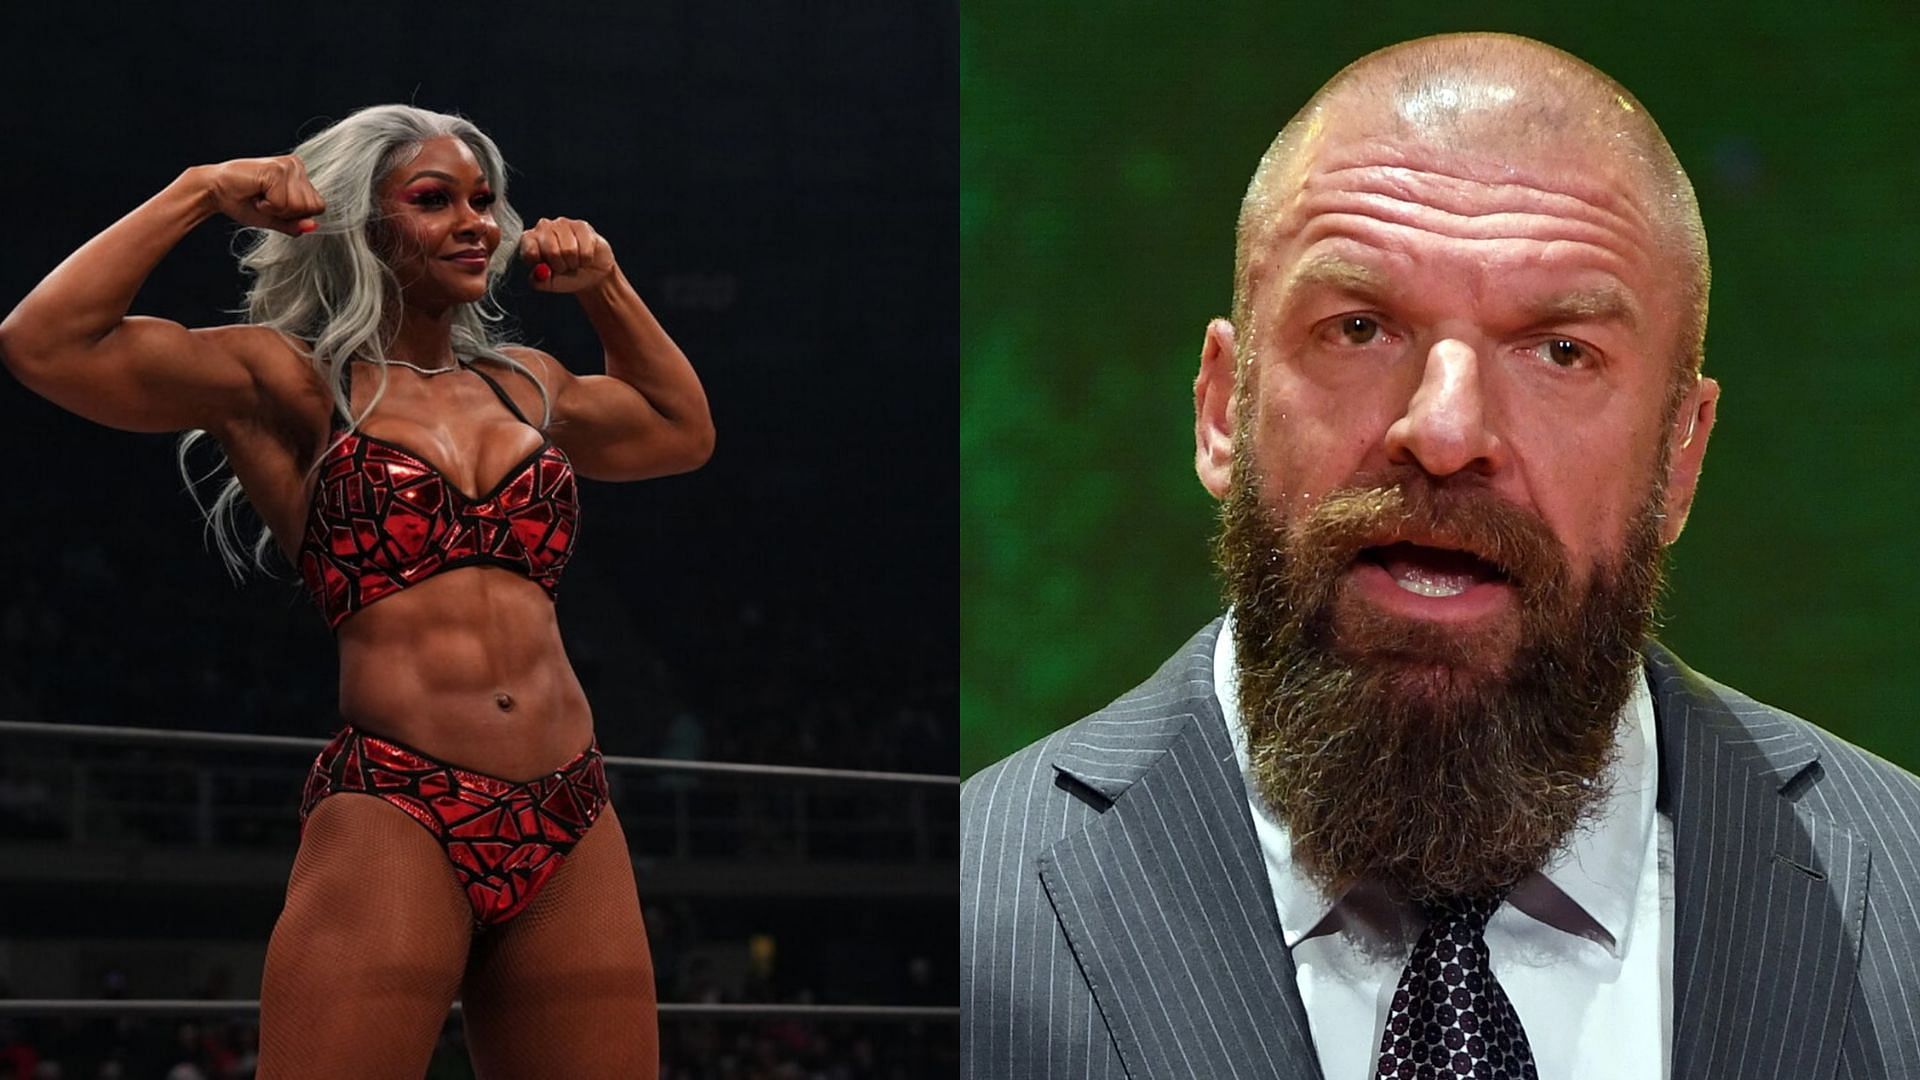 Triple H talked about plans for Jade Cargill in WWE